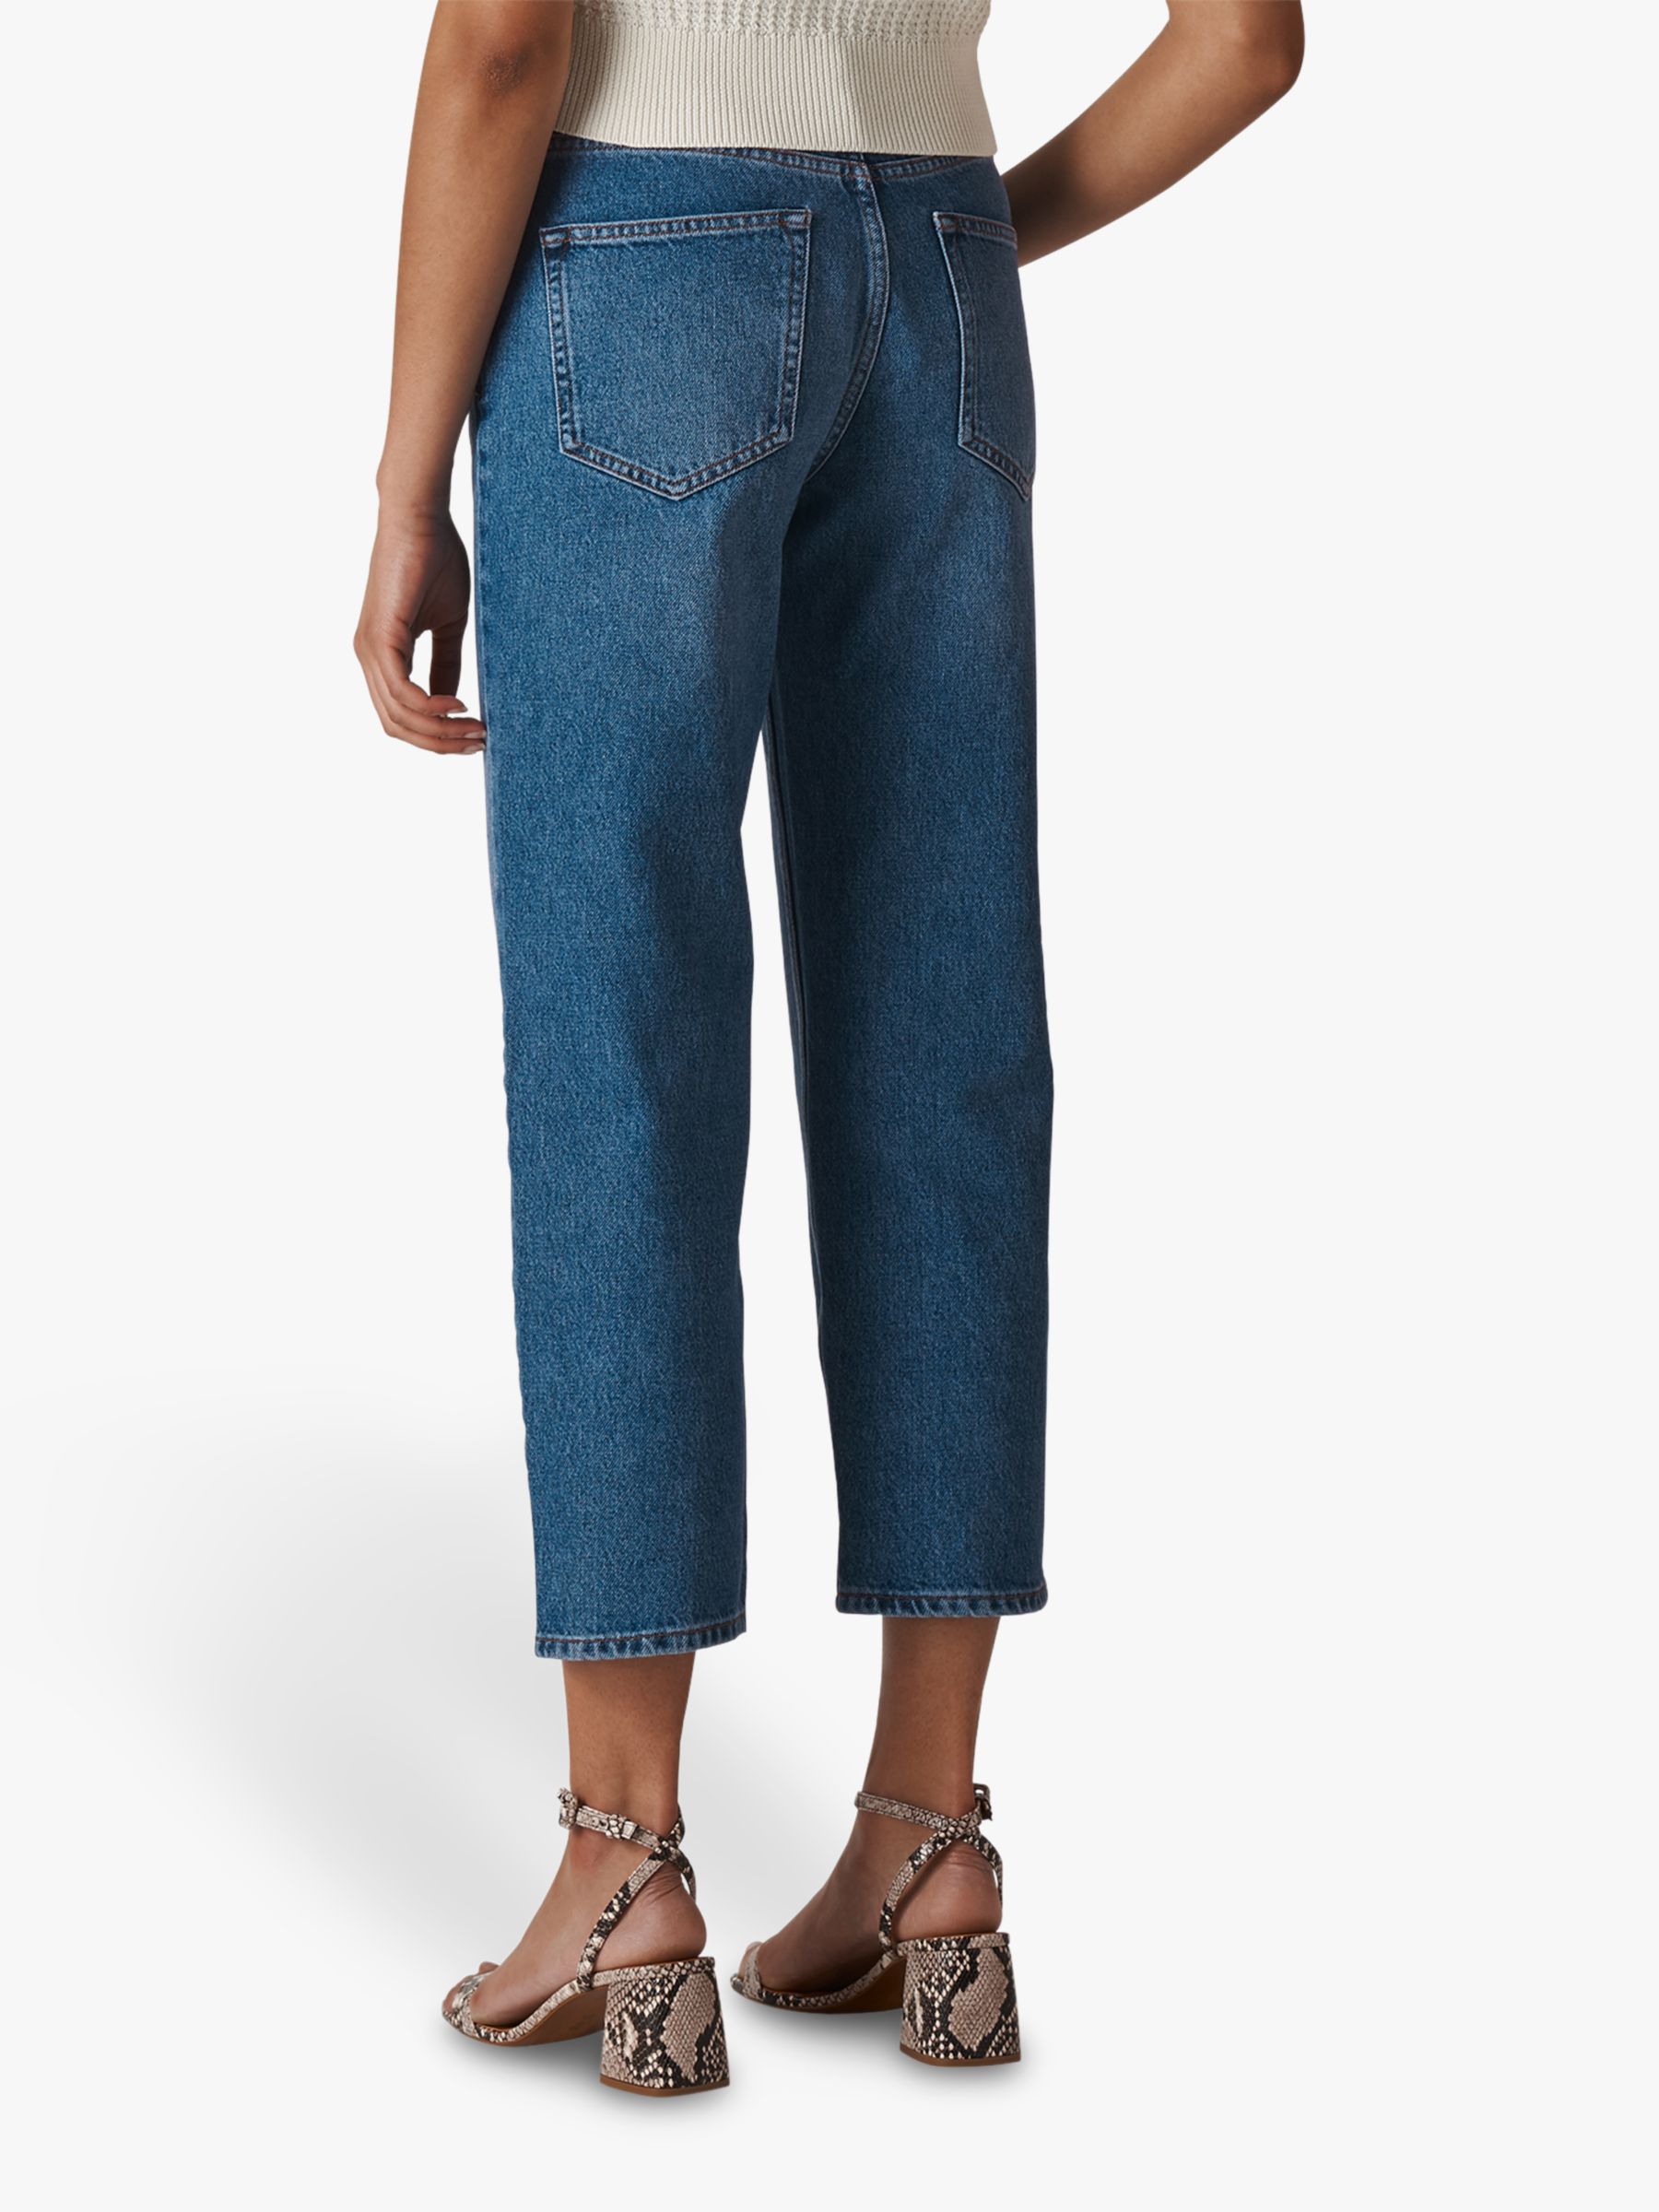 Buy Whistles Hollie Button Front Jeans Online at johnlewis.com